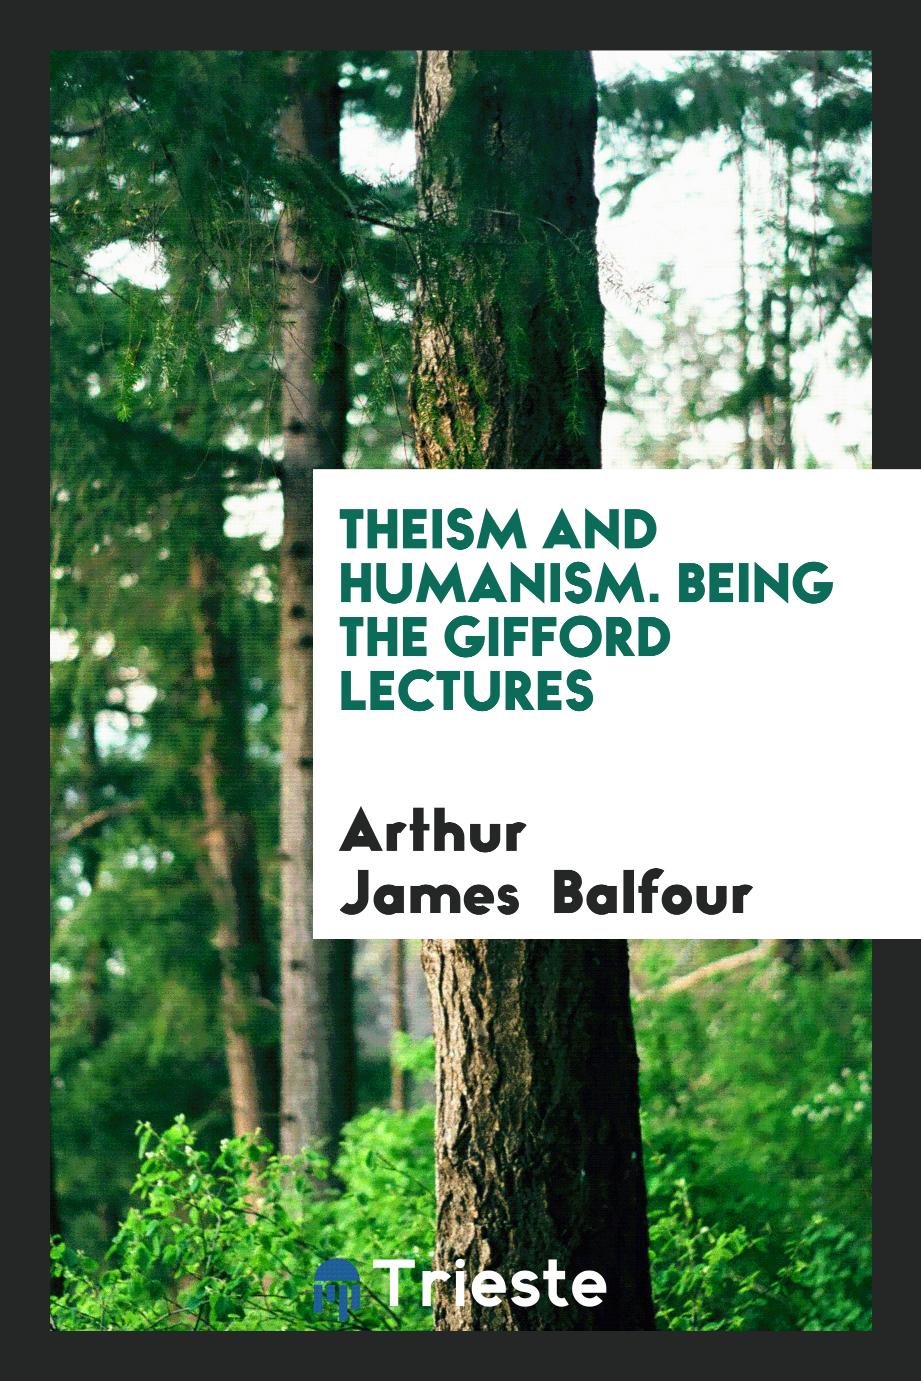 Theism and Humanism. Being the Gifford Lectures